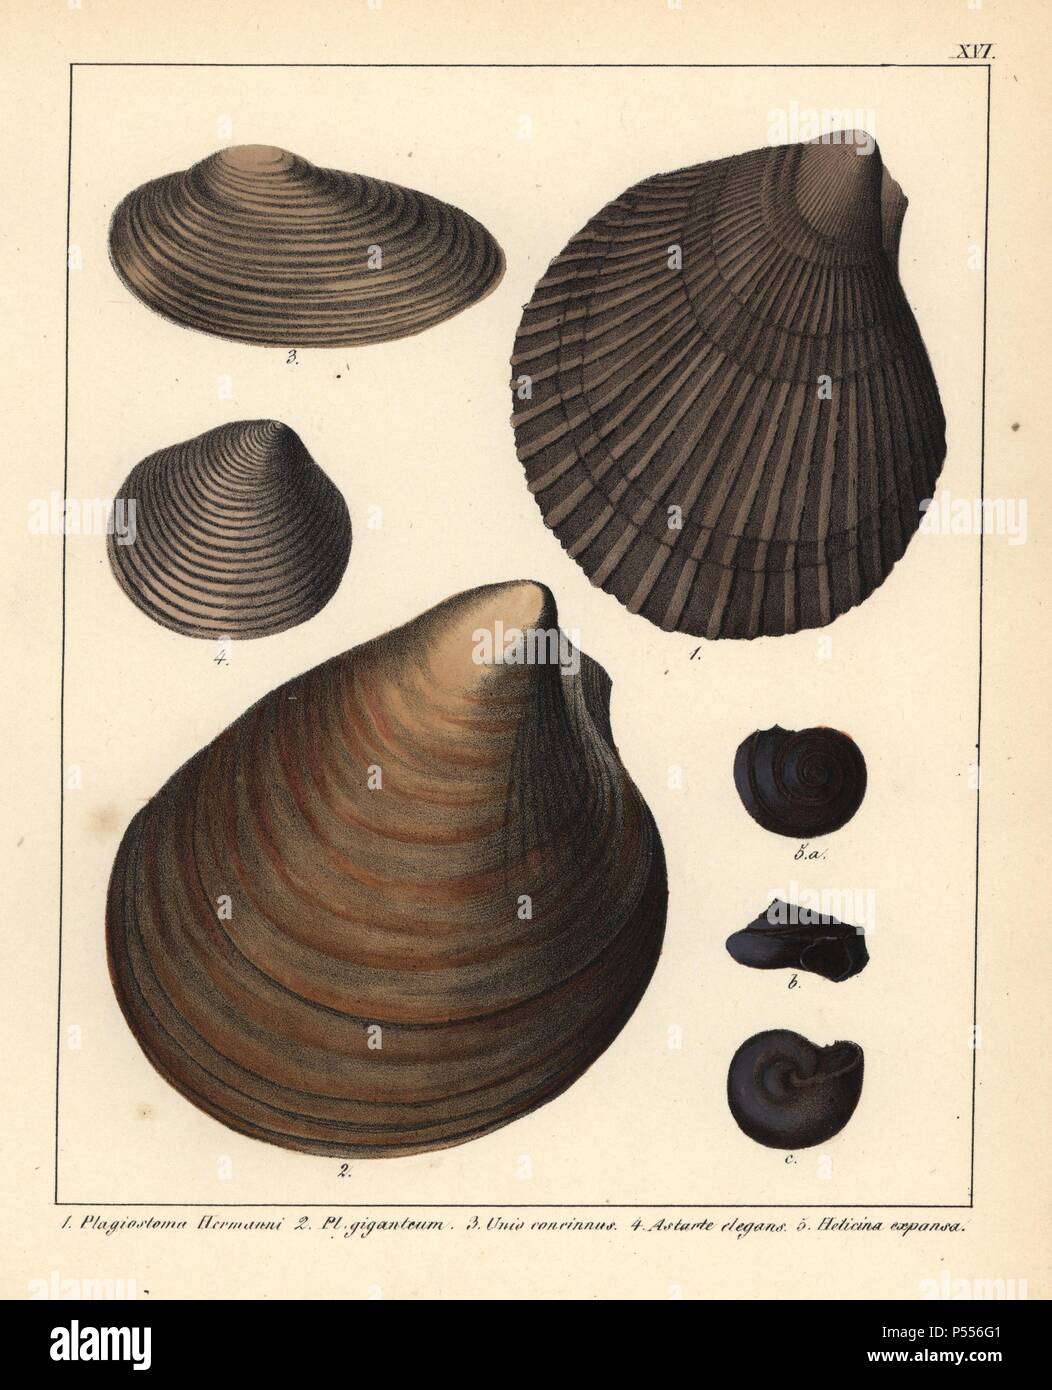 Fossils of extinct bivalves: Plagiostoma hermanni, Pl. giganteum, Unio concinnus, clam Astarte elegans, and land snail Helicina expansa. Handcoloured lithograph by an unknown artist from Dr. F.A. Schmidt's 'Petrefactenbuch,' published in Stuttgart, Germany, 1855 by Verlag von Krais & Hoffmann. Dr. Schmidt's 'Book of Petrification' introduced fossils and palaeontology to both the specialist and general reader. Stock Photo